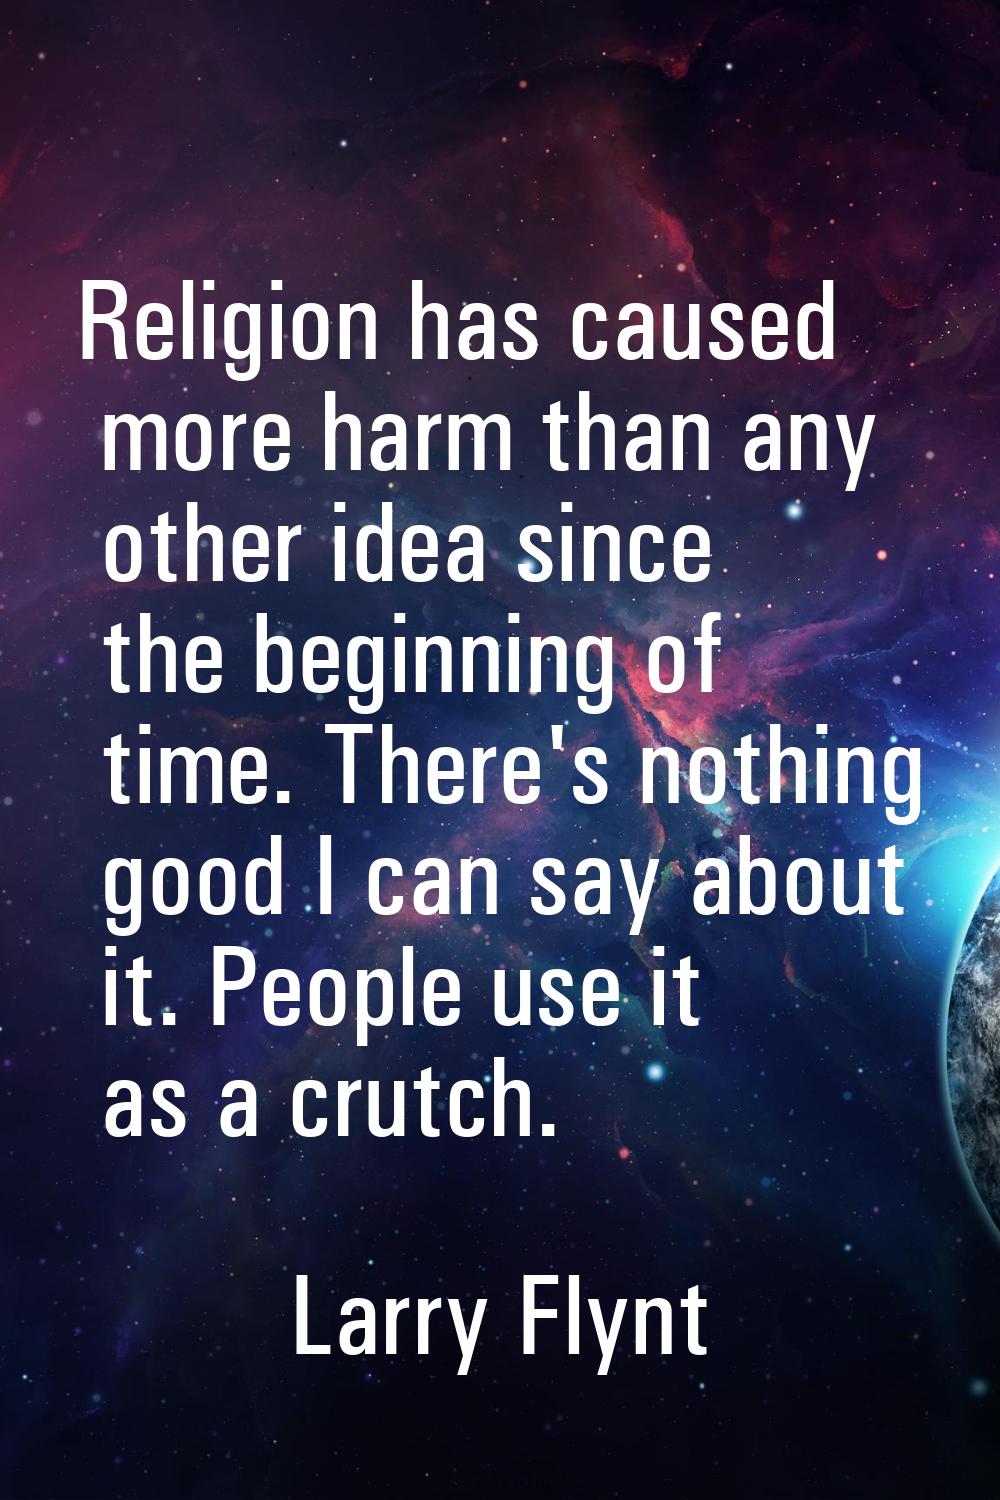 Religion has caused more harm than any other idea since the beginning of time. There's nothing good